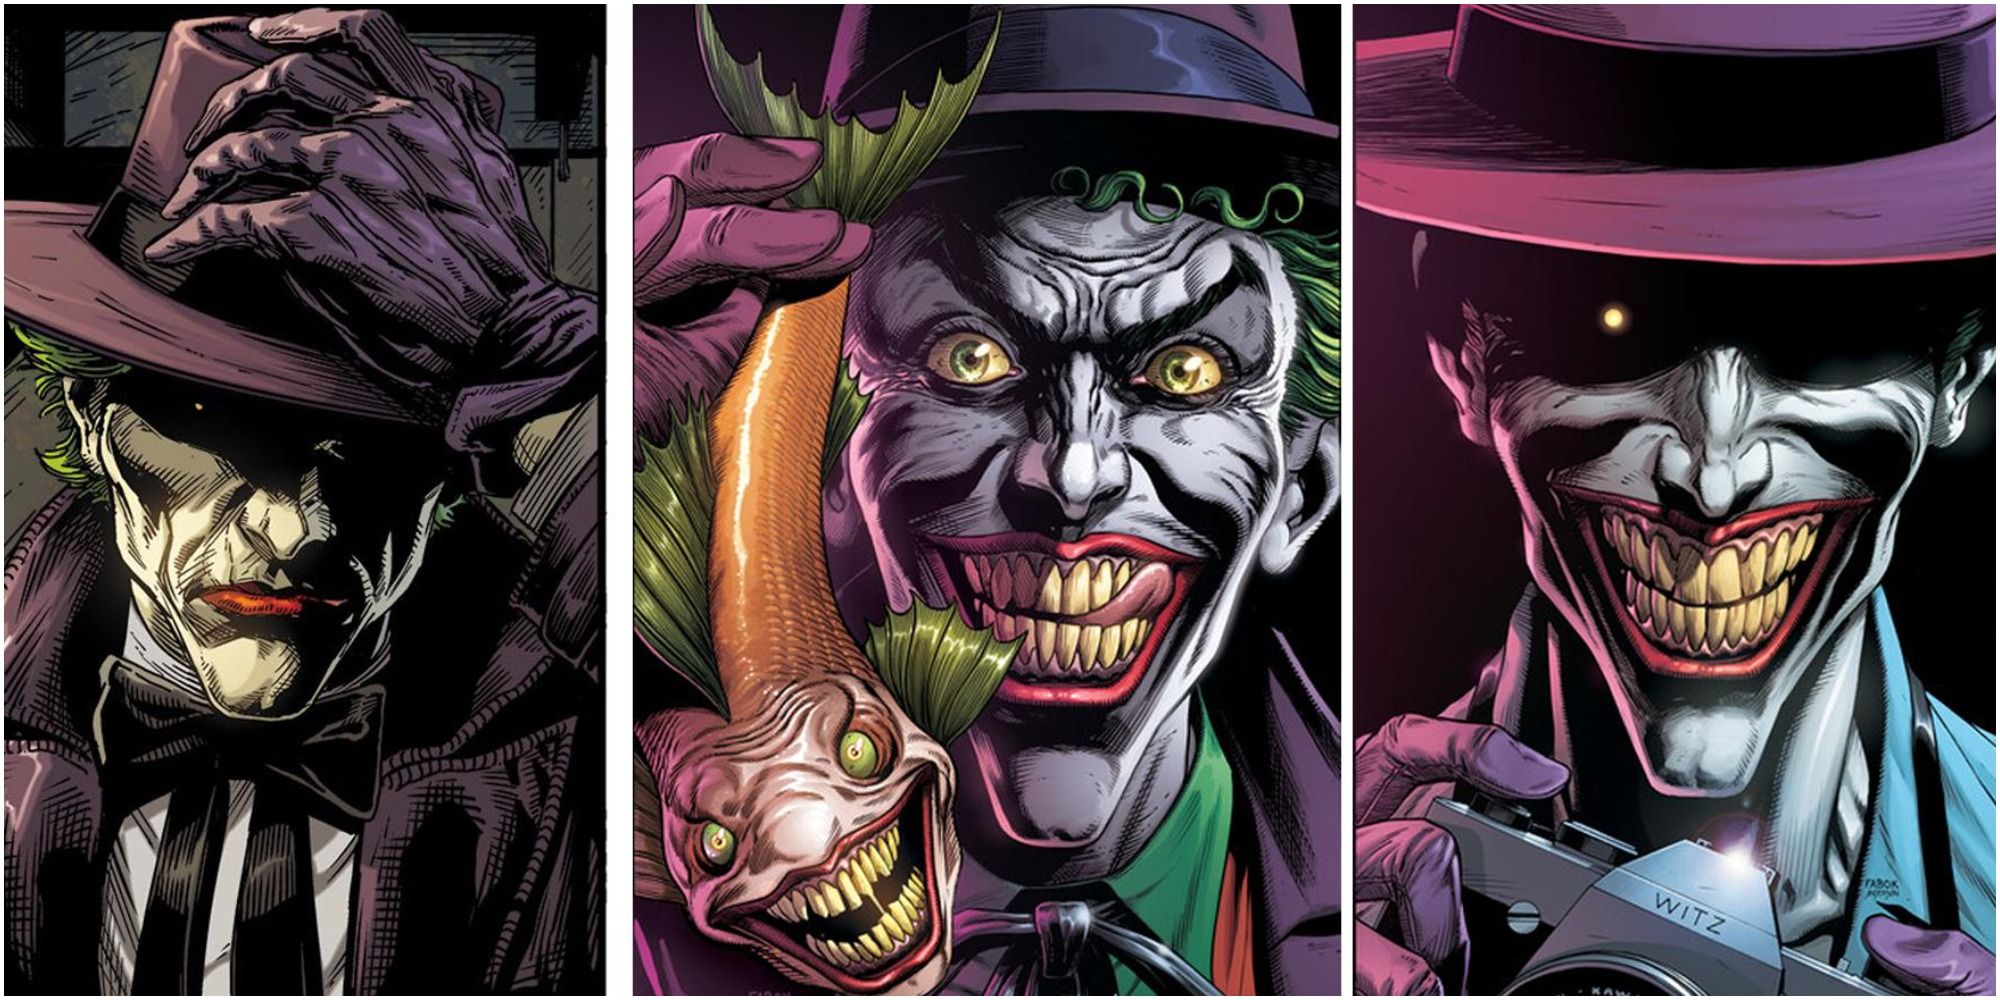 Three Jokers Batman DC, Joker On The Left Holding His Hat While Frowning, Joker In The Middle Holding A Fish With His Face, And Joker On The Right Holding A Camera